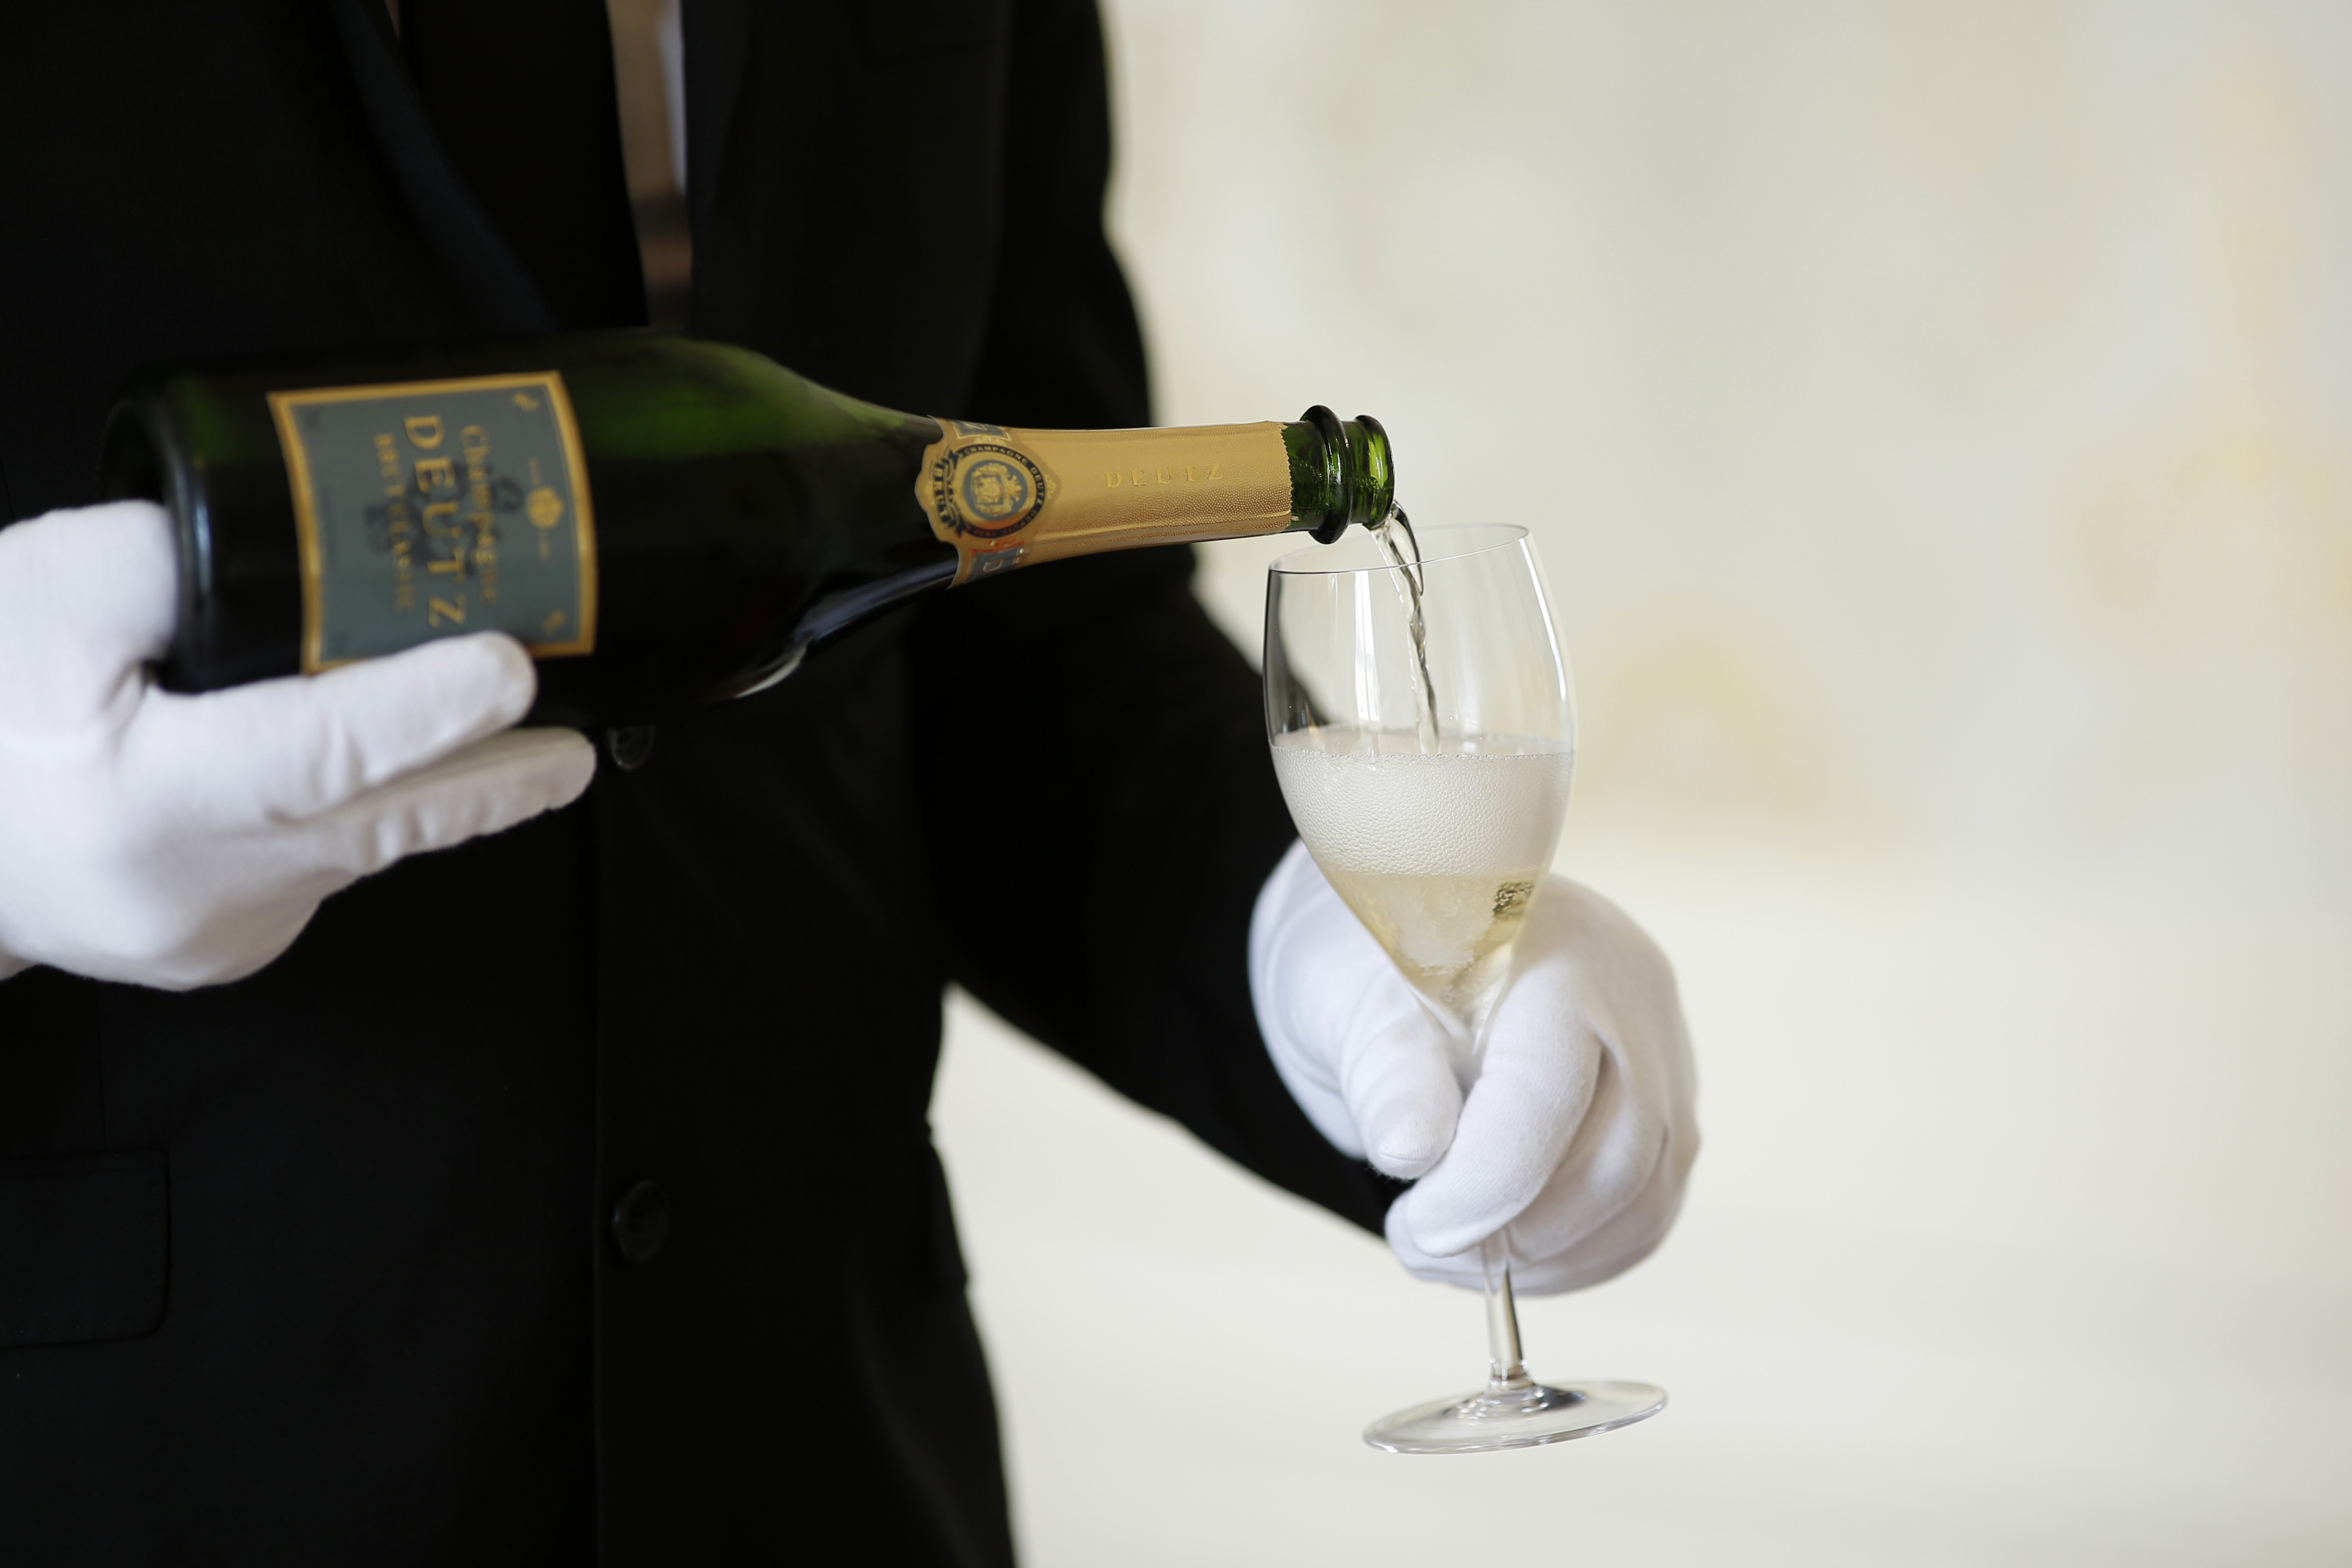 Demand for champagne softens after post-Covid boom years, says LVMH